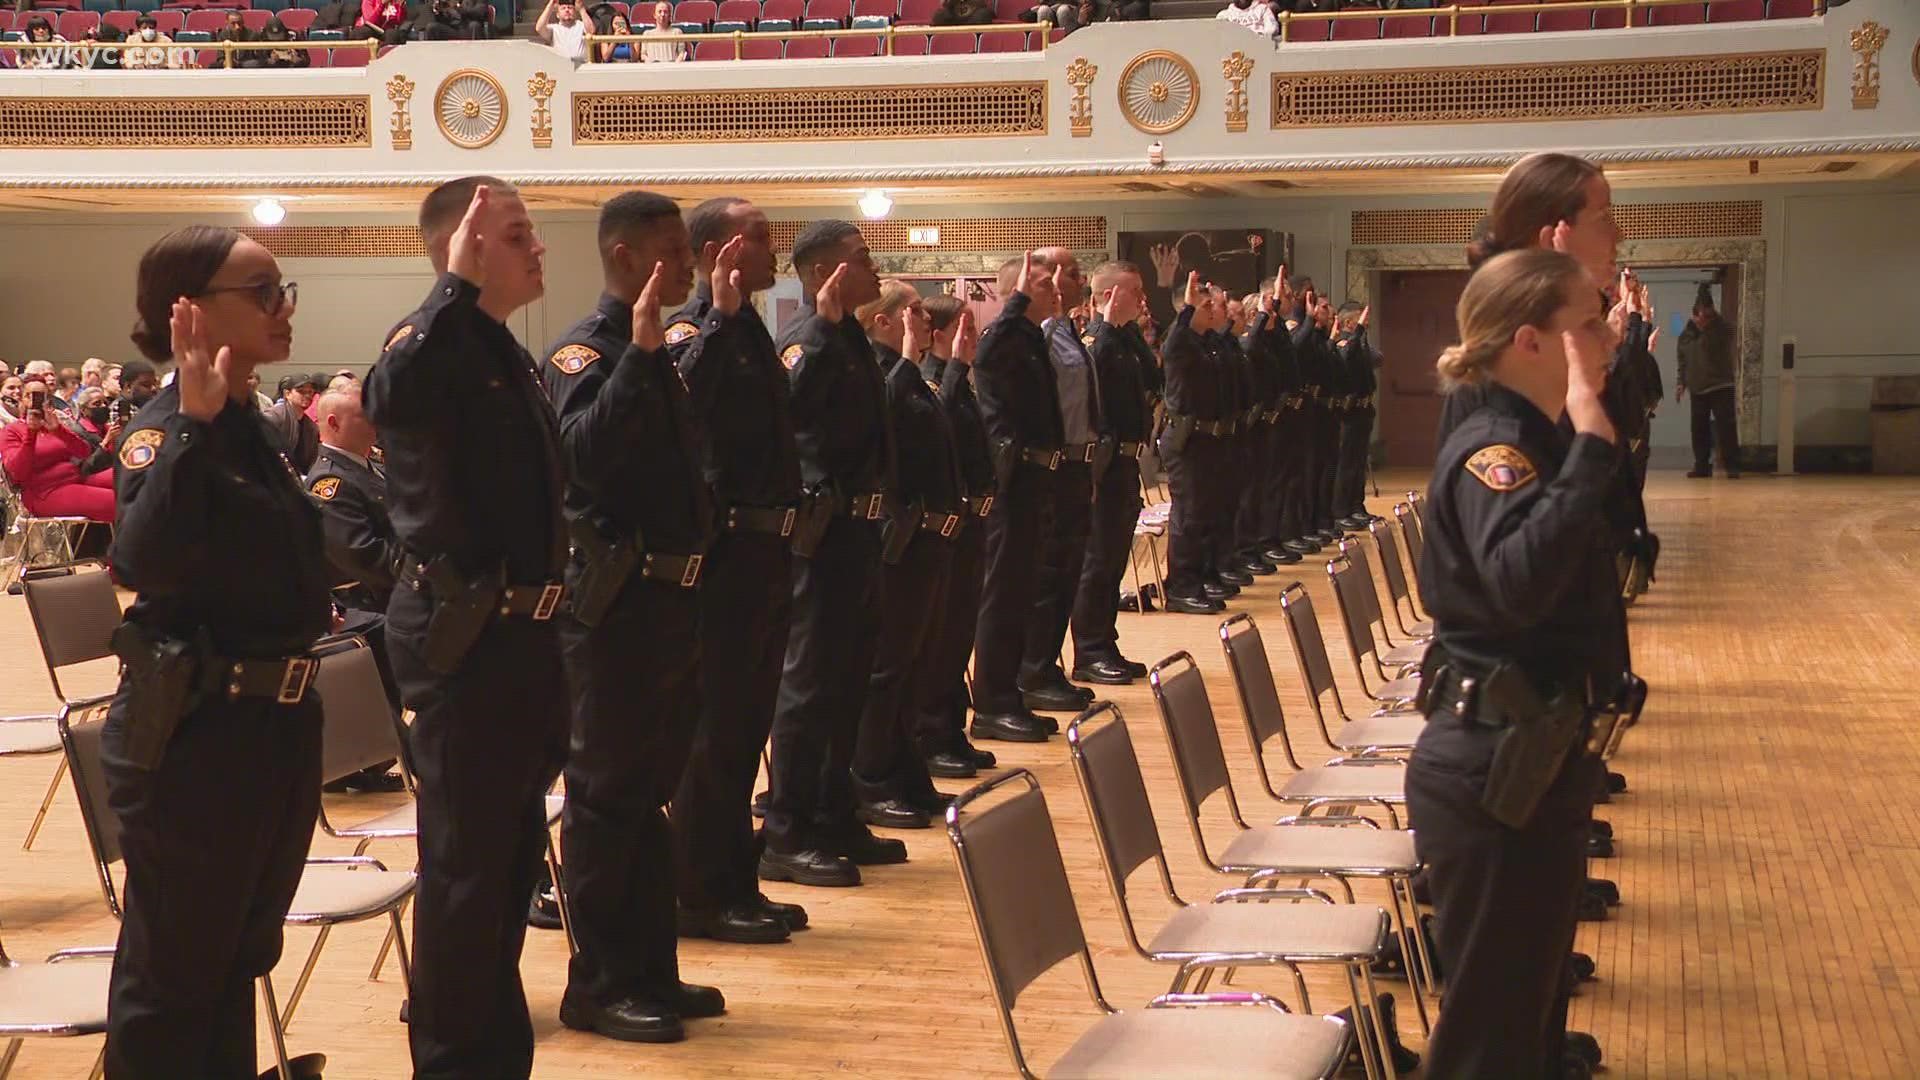 Cleveland Mayor Justin Bibb administered the oath of office for the new Police Academy Graduates.